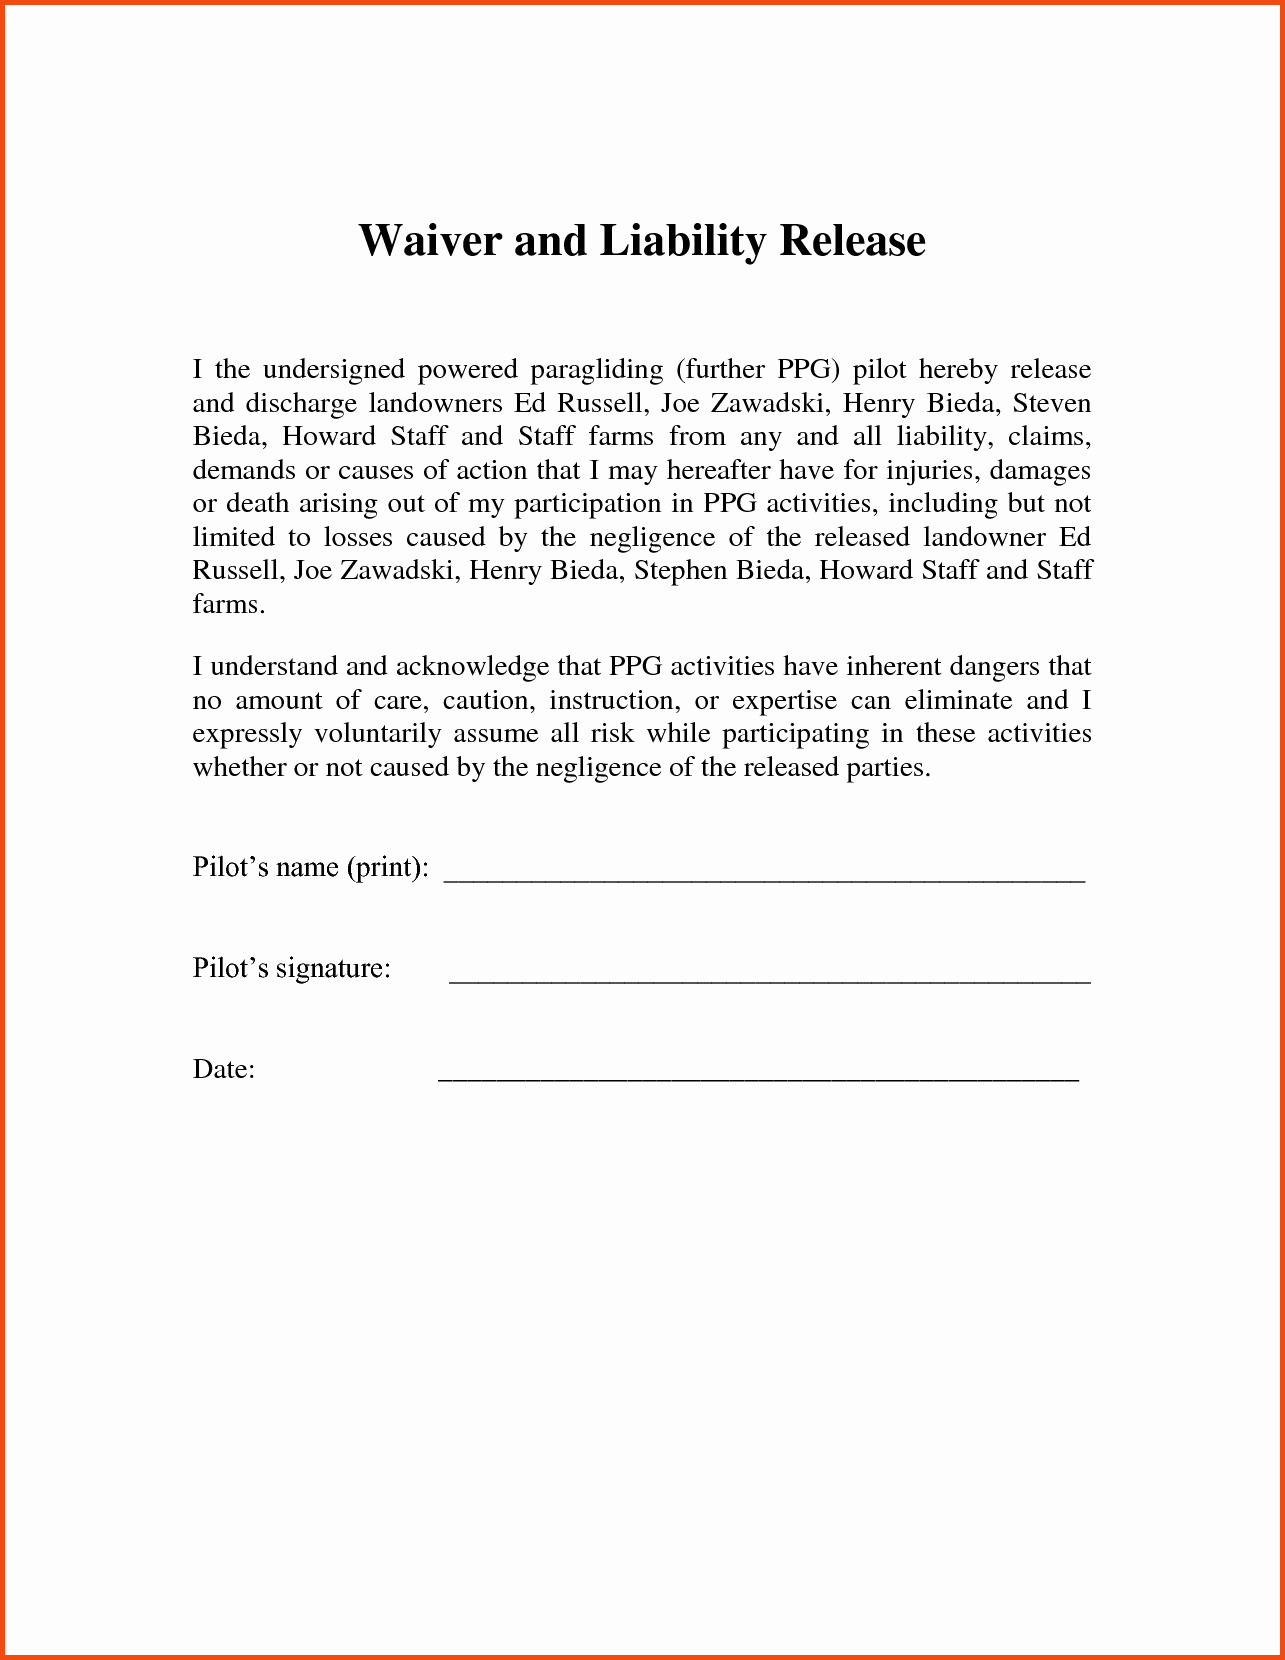 Liability Waiver form Free New Letter Release Liability Template Collection